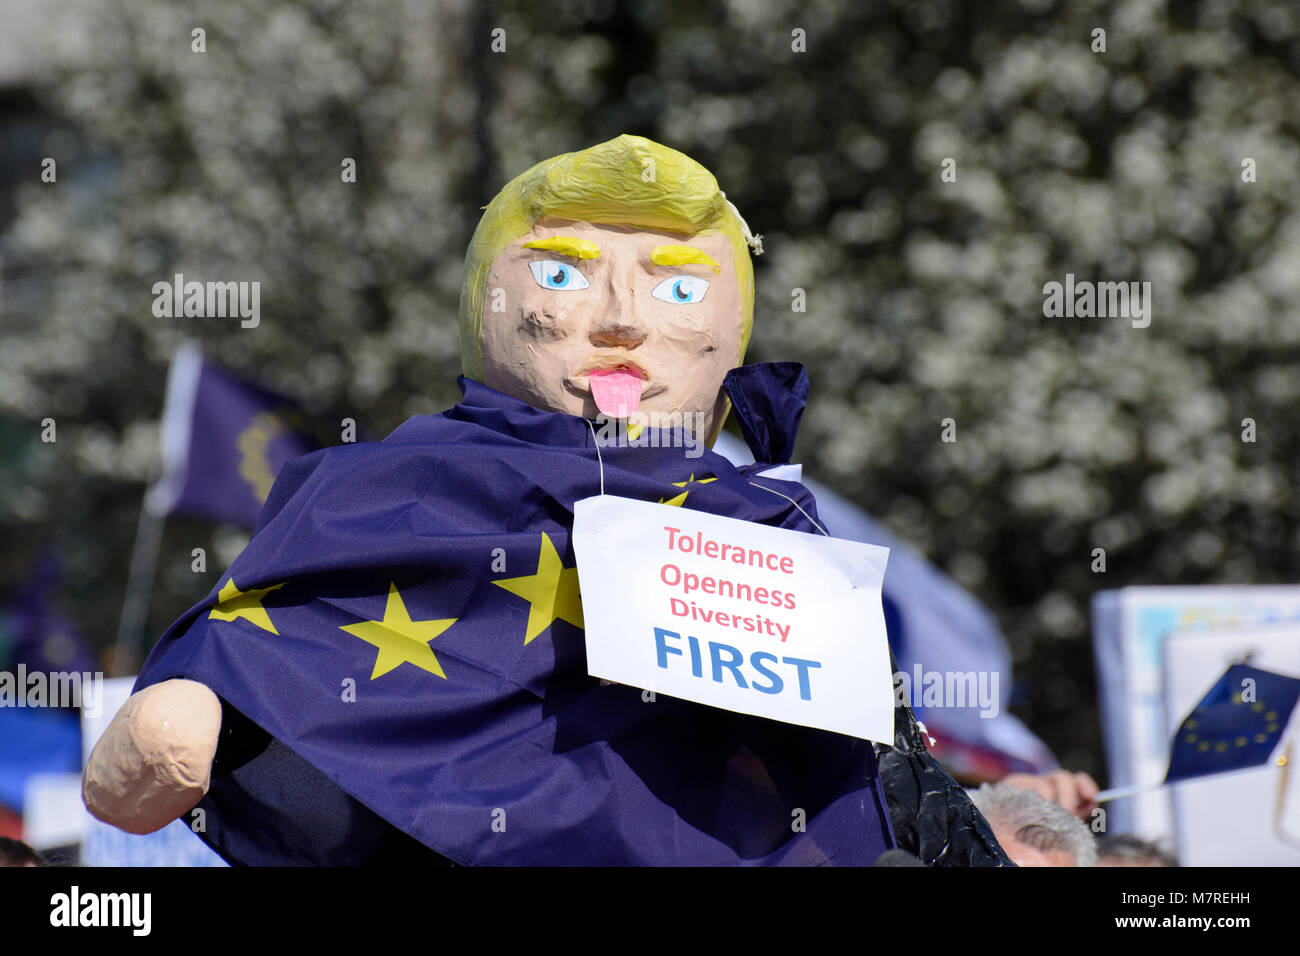 Donald Trump effigy wearing EU flag and carrying a placard reading 'Tolerance Openness Diversity First' at the Unite for Europe march in London, UK. Stock Photo